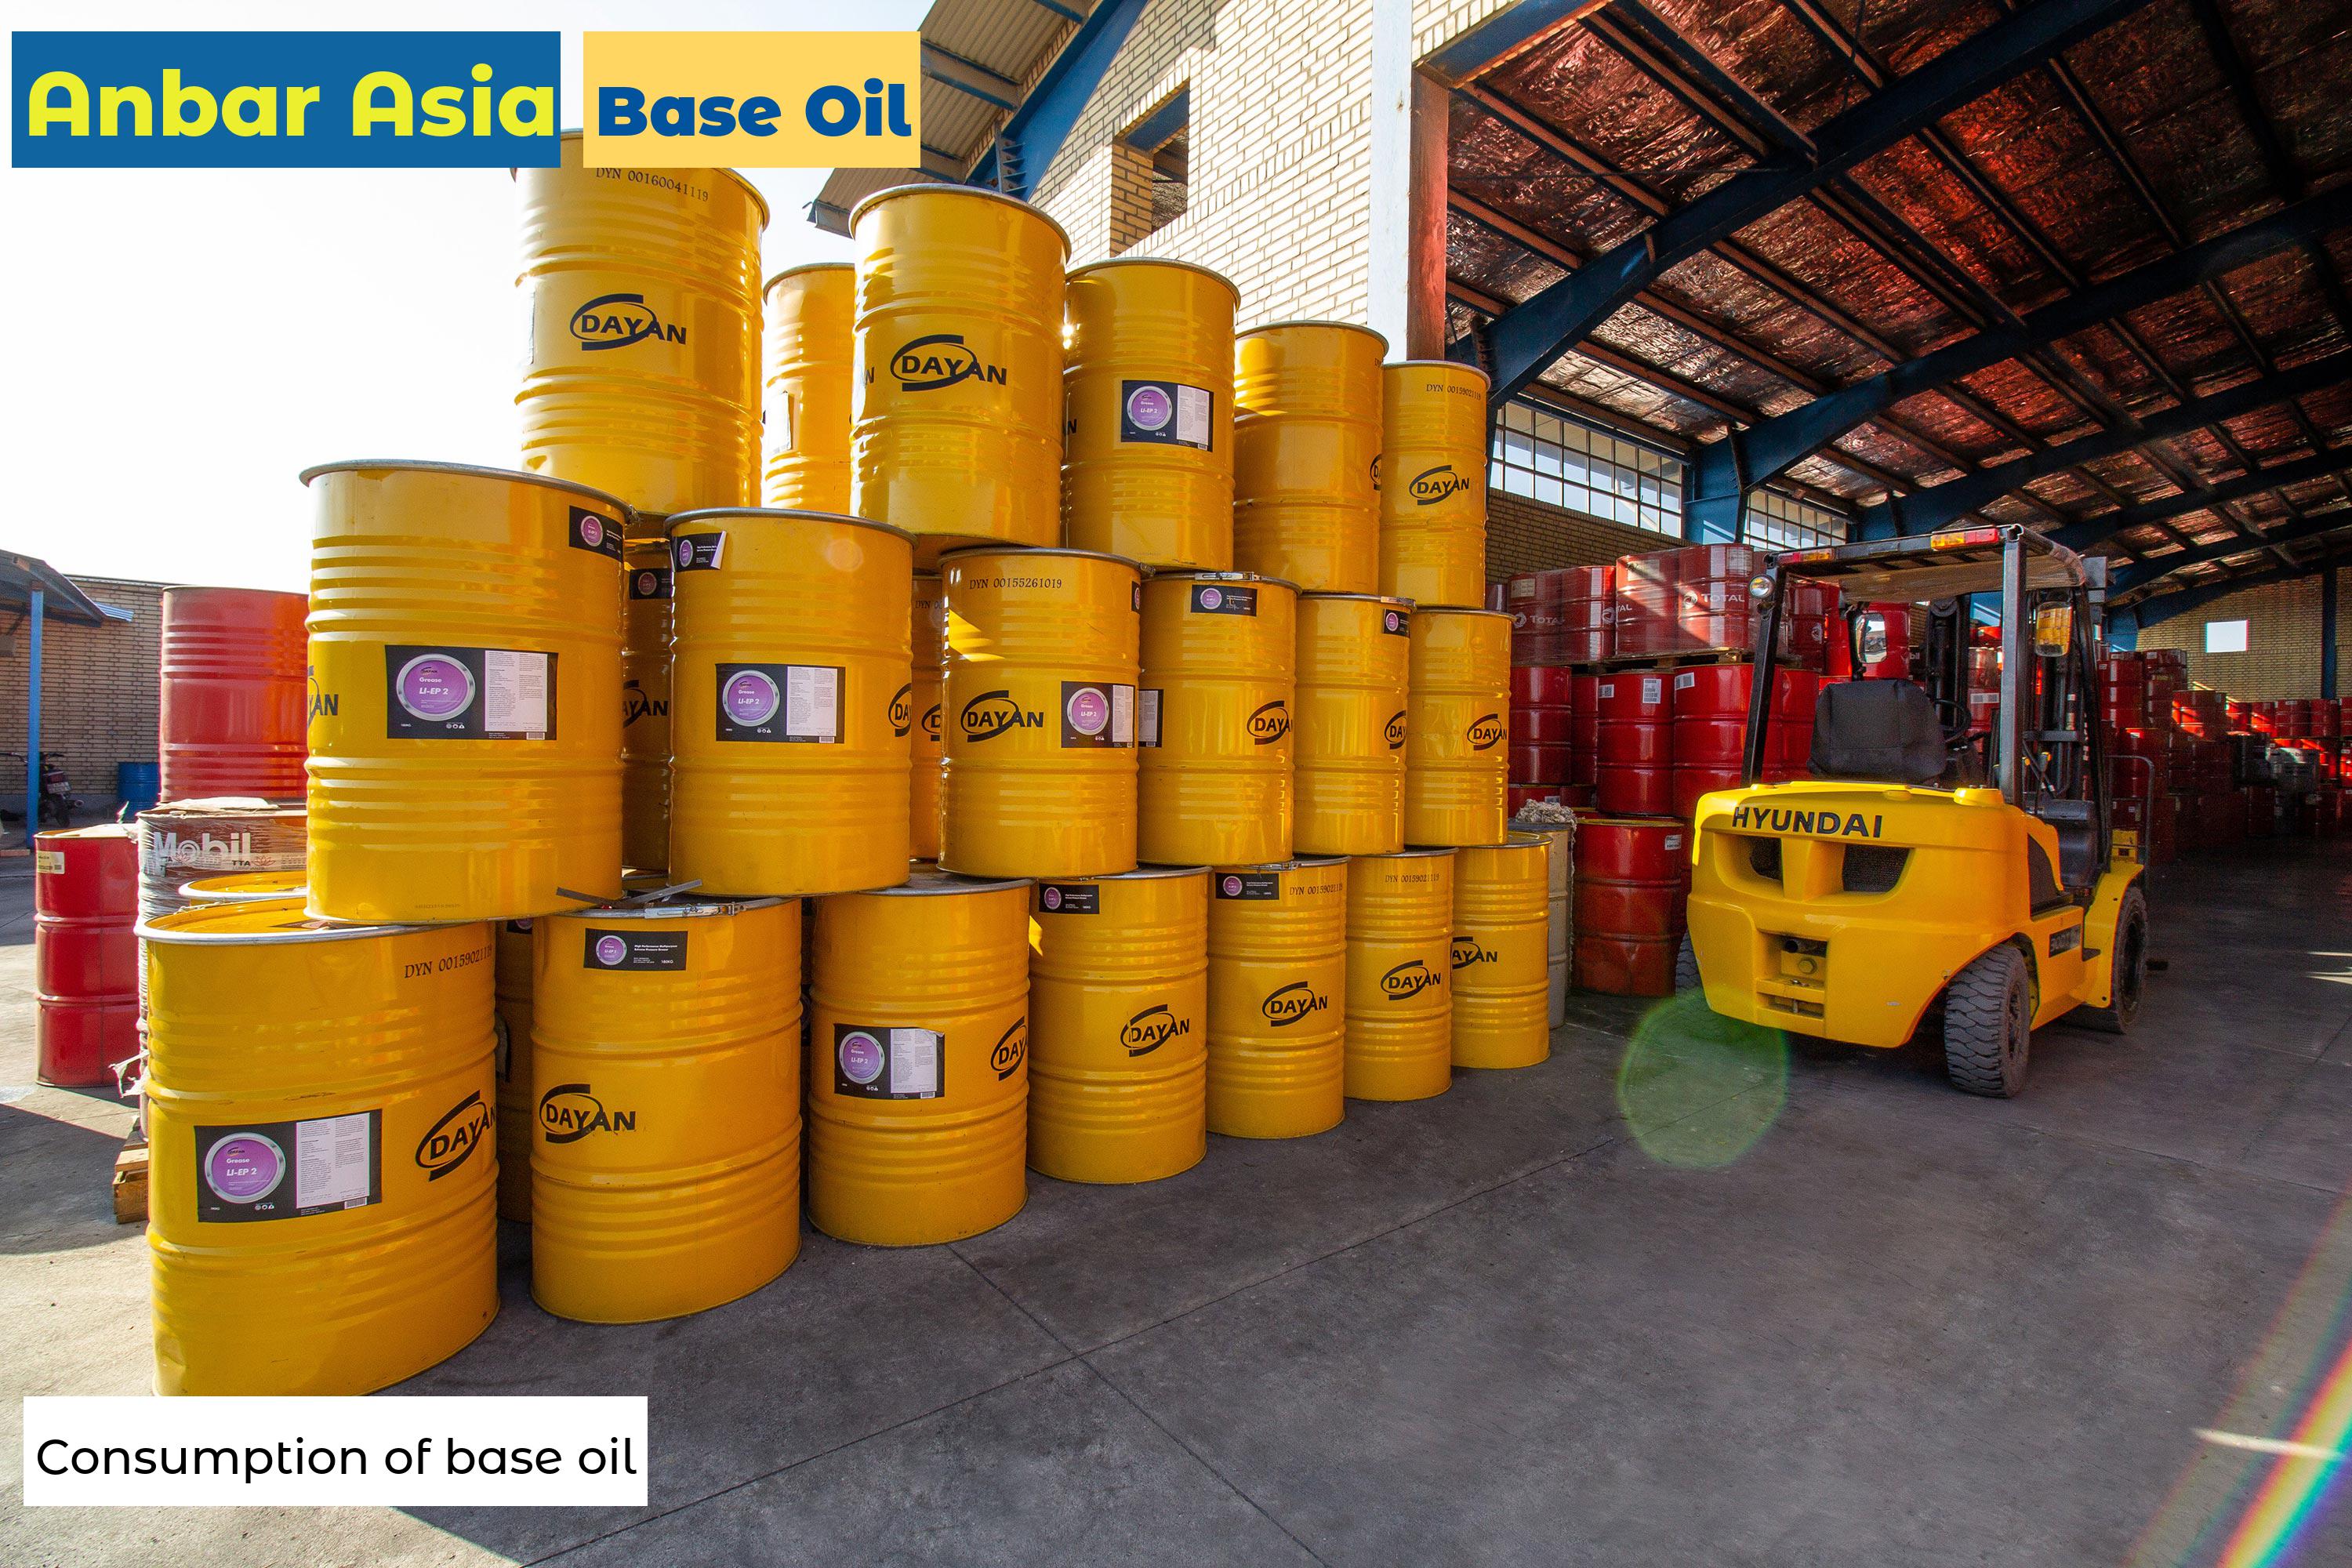 Consumption of base oil